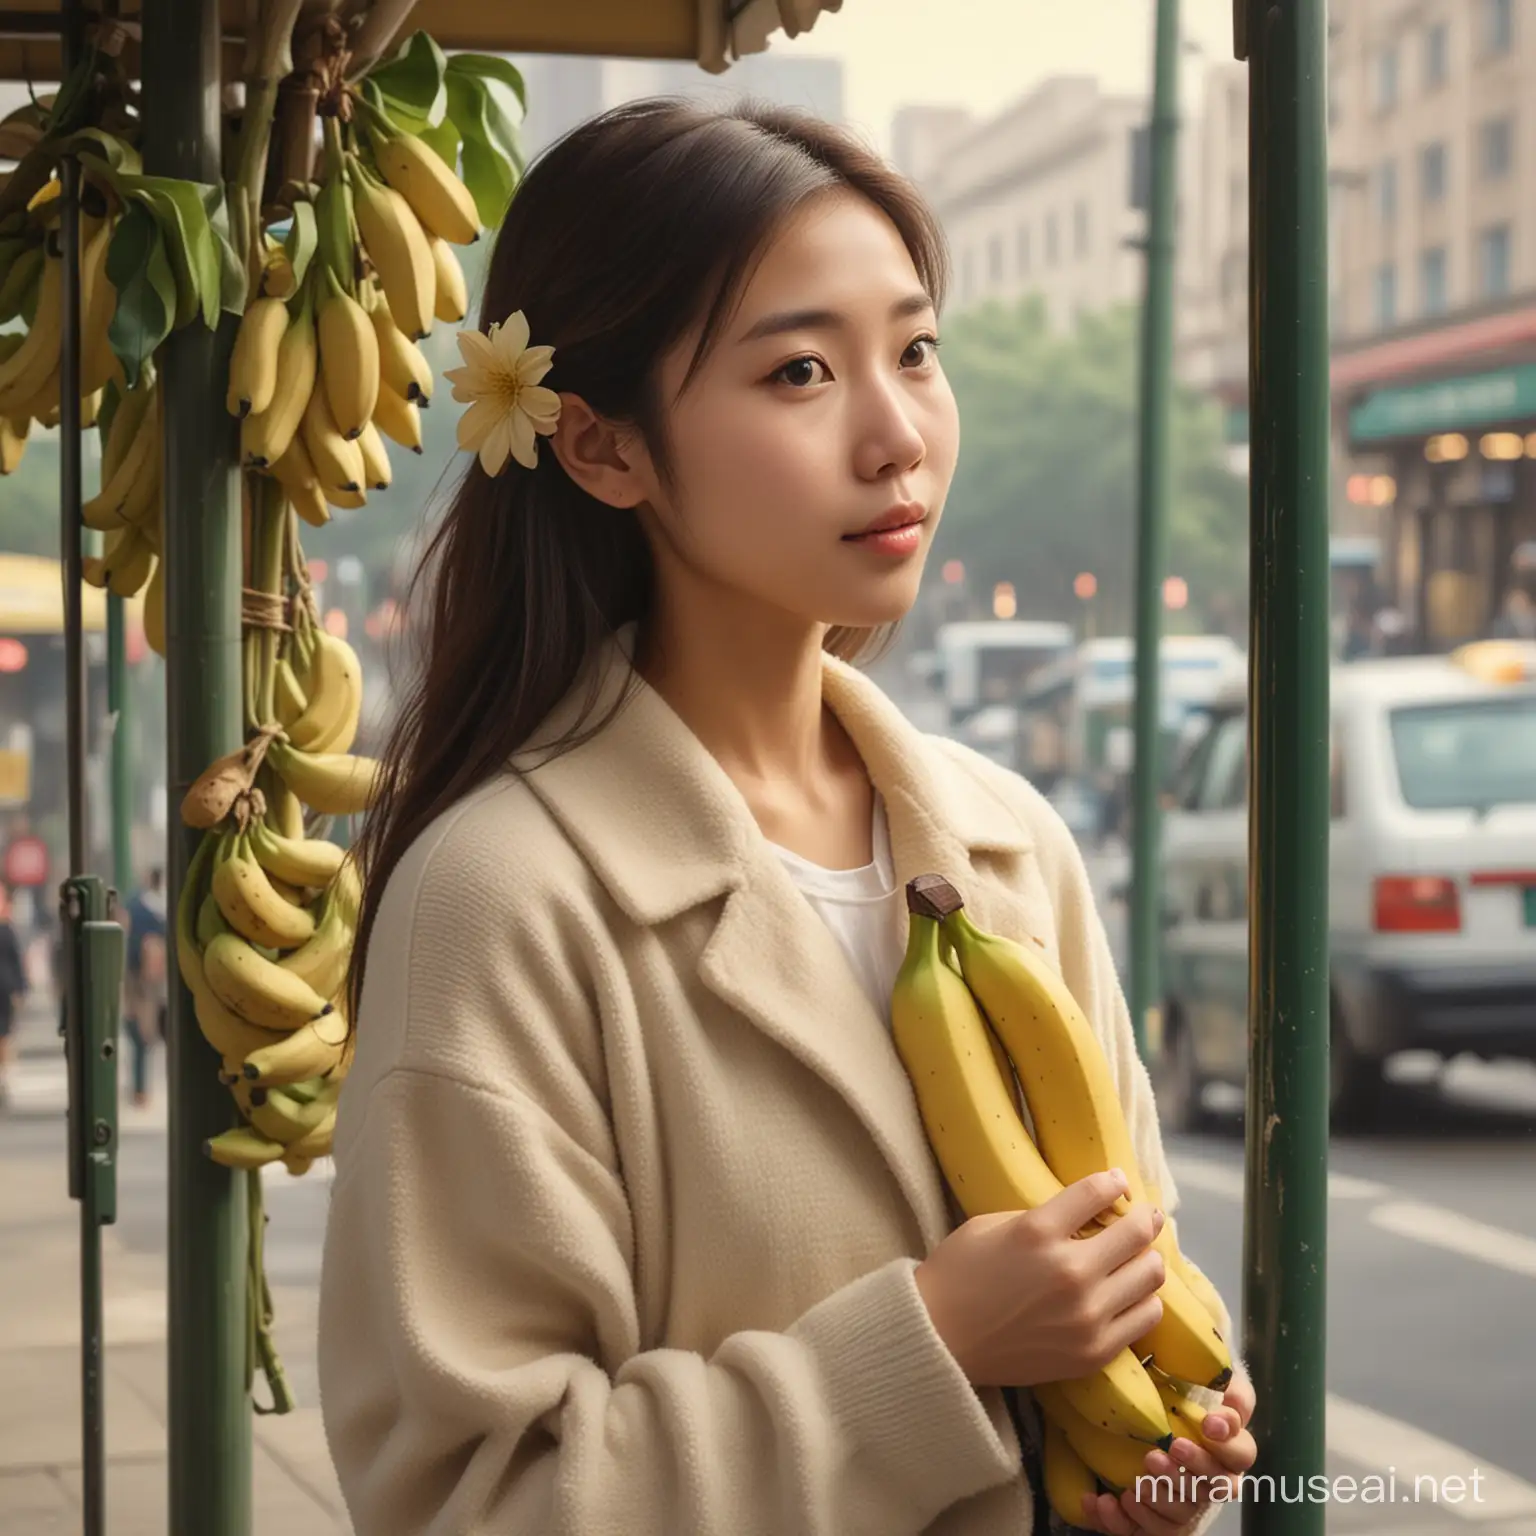 A sweet Taiwanese girl stands at a bus stop, holding a bunch of bananas, exuding a light, romantic atmosphere. Her expression is gentle yet contemplative, typical of East Asian heritage, against a backdrop of soft, blurred, dreamy cityscape.
Create with Claude Monet style.